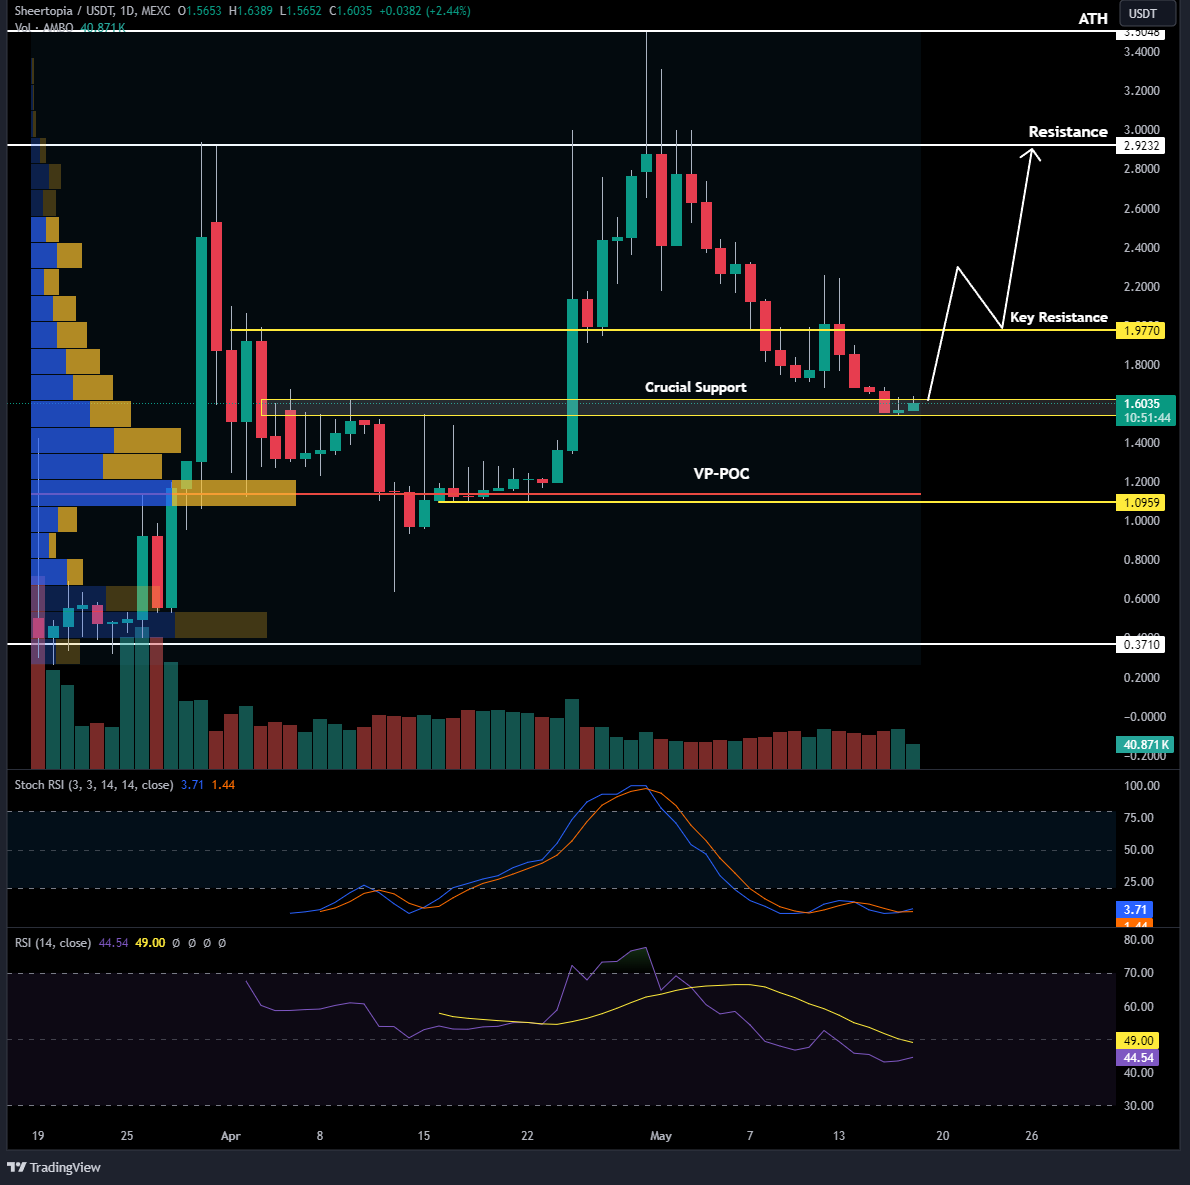 $AMBO / $USDT is holding a solid floor price at the crucial $1.6 support level. 

With the StochRSI in the oversold territory, a sharp recovery in @sheertopia's price is expected. 

As they are building within the GameFi and AI industries, the market share they could capture is